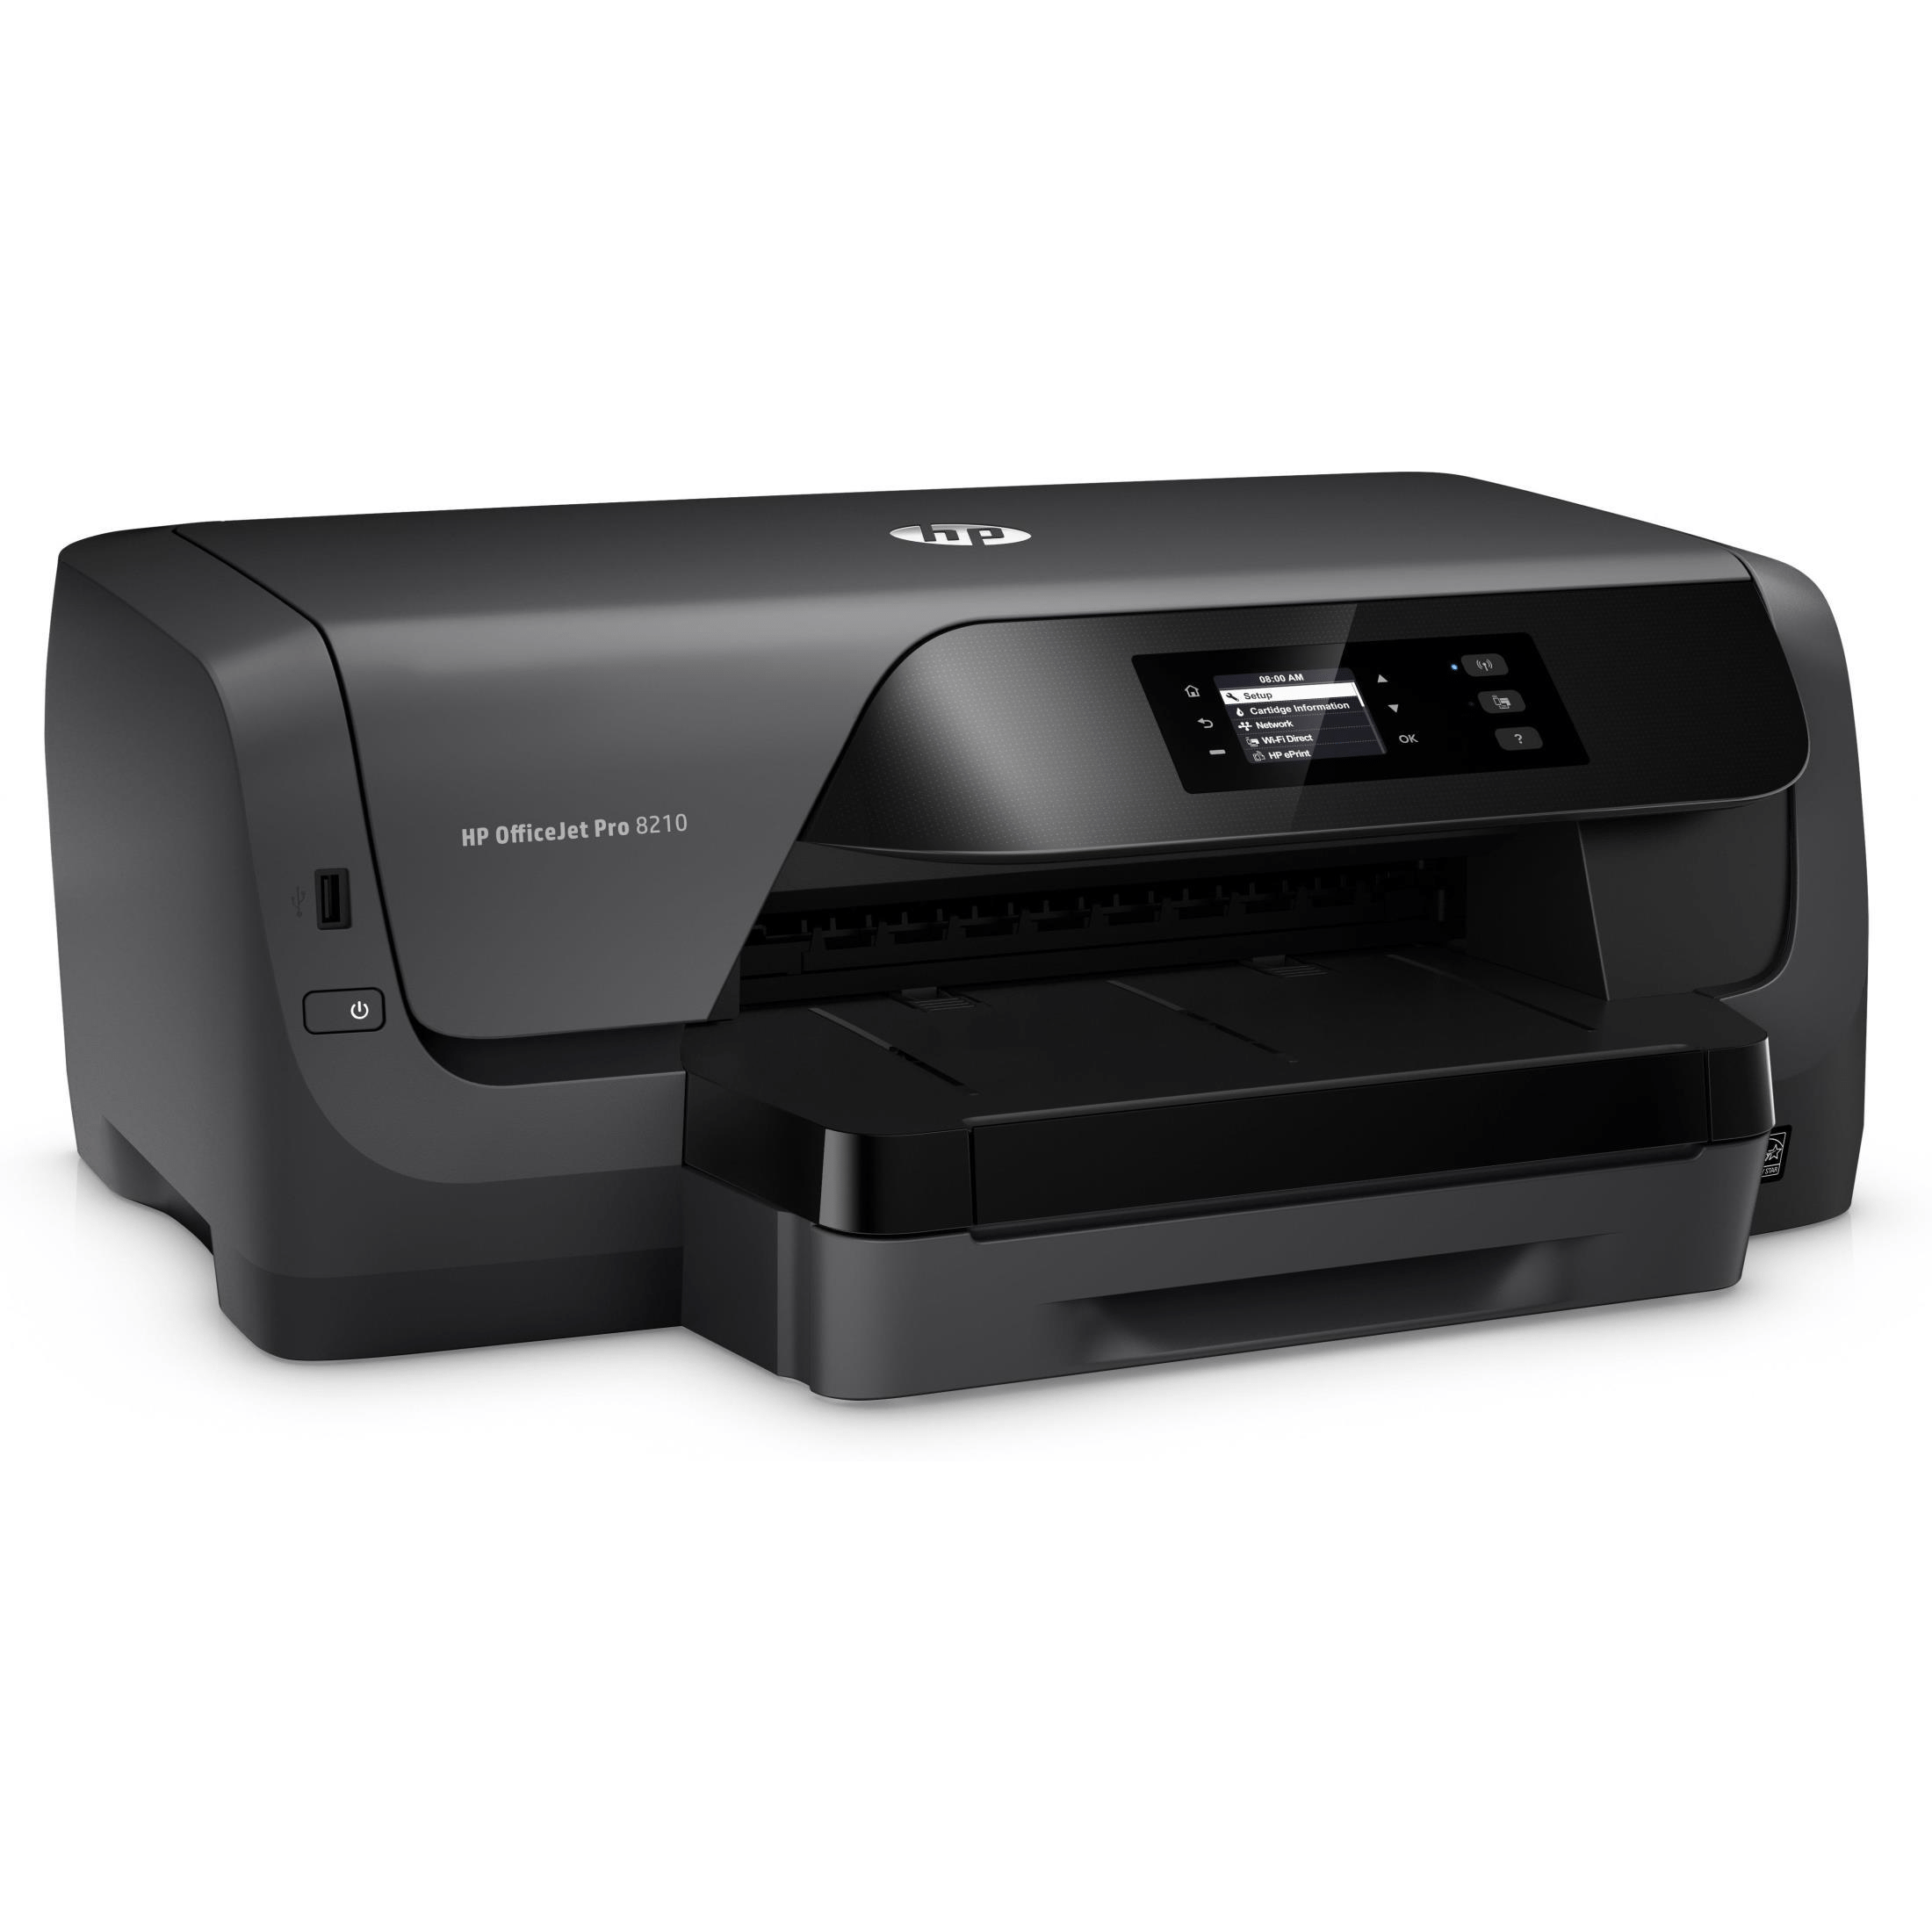 Connect HP Officejet Pro 7740 Printer with WiFi Network